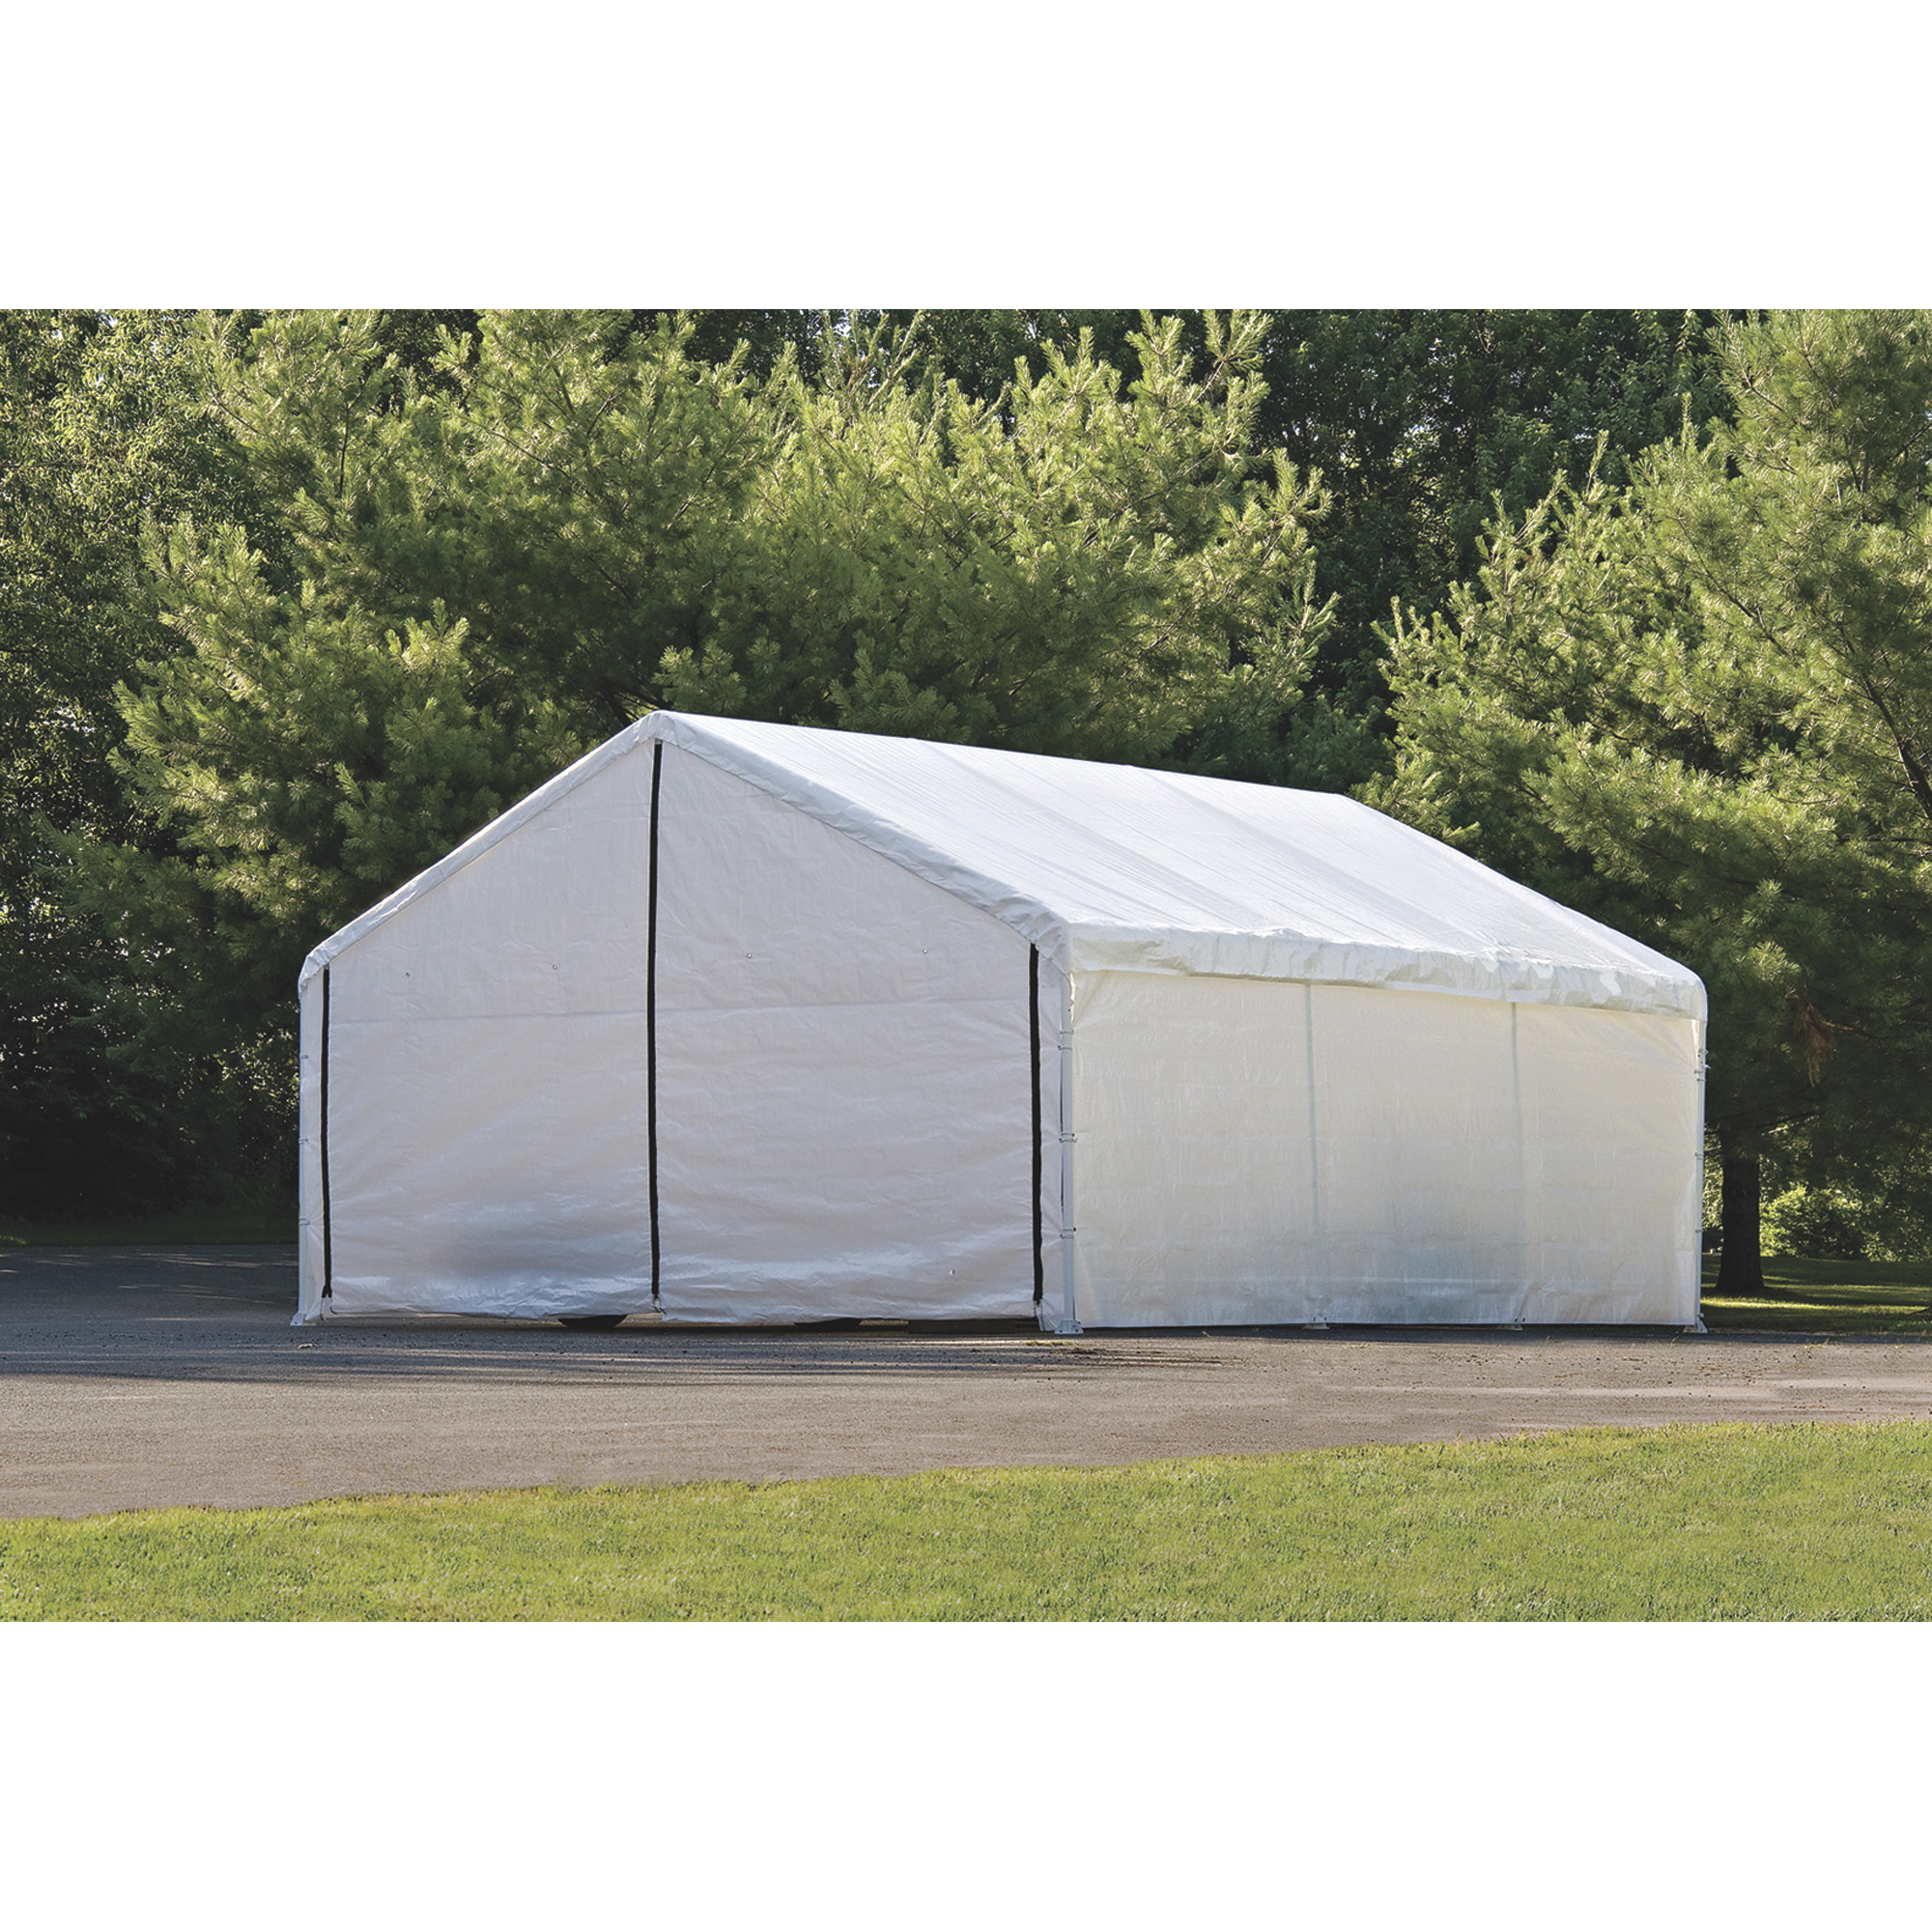 ShelterLogic Ultra Max Outdoor Canopy Enclosure Kit, Fits Item# 252308, 50ft. x 30ft. Canopy, Model 27777